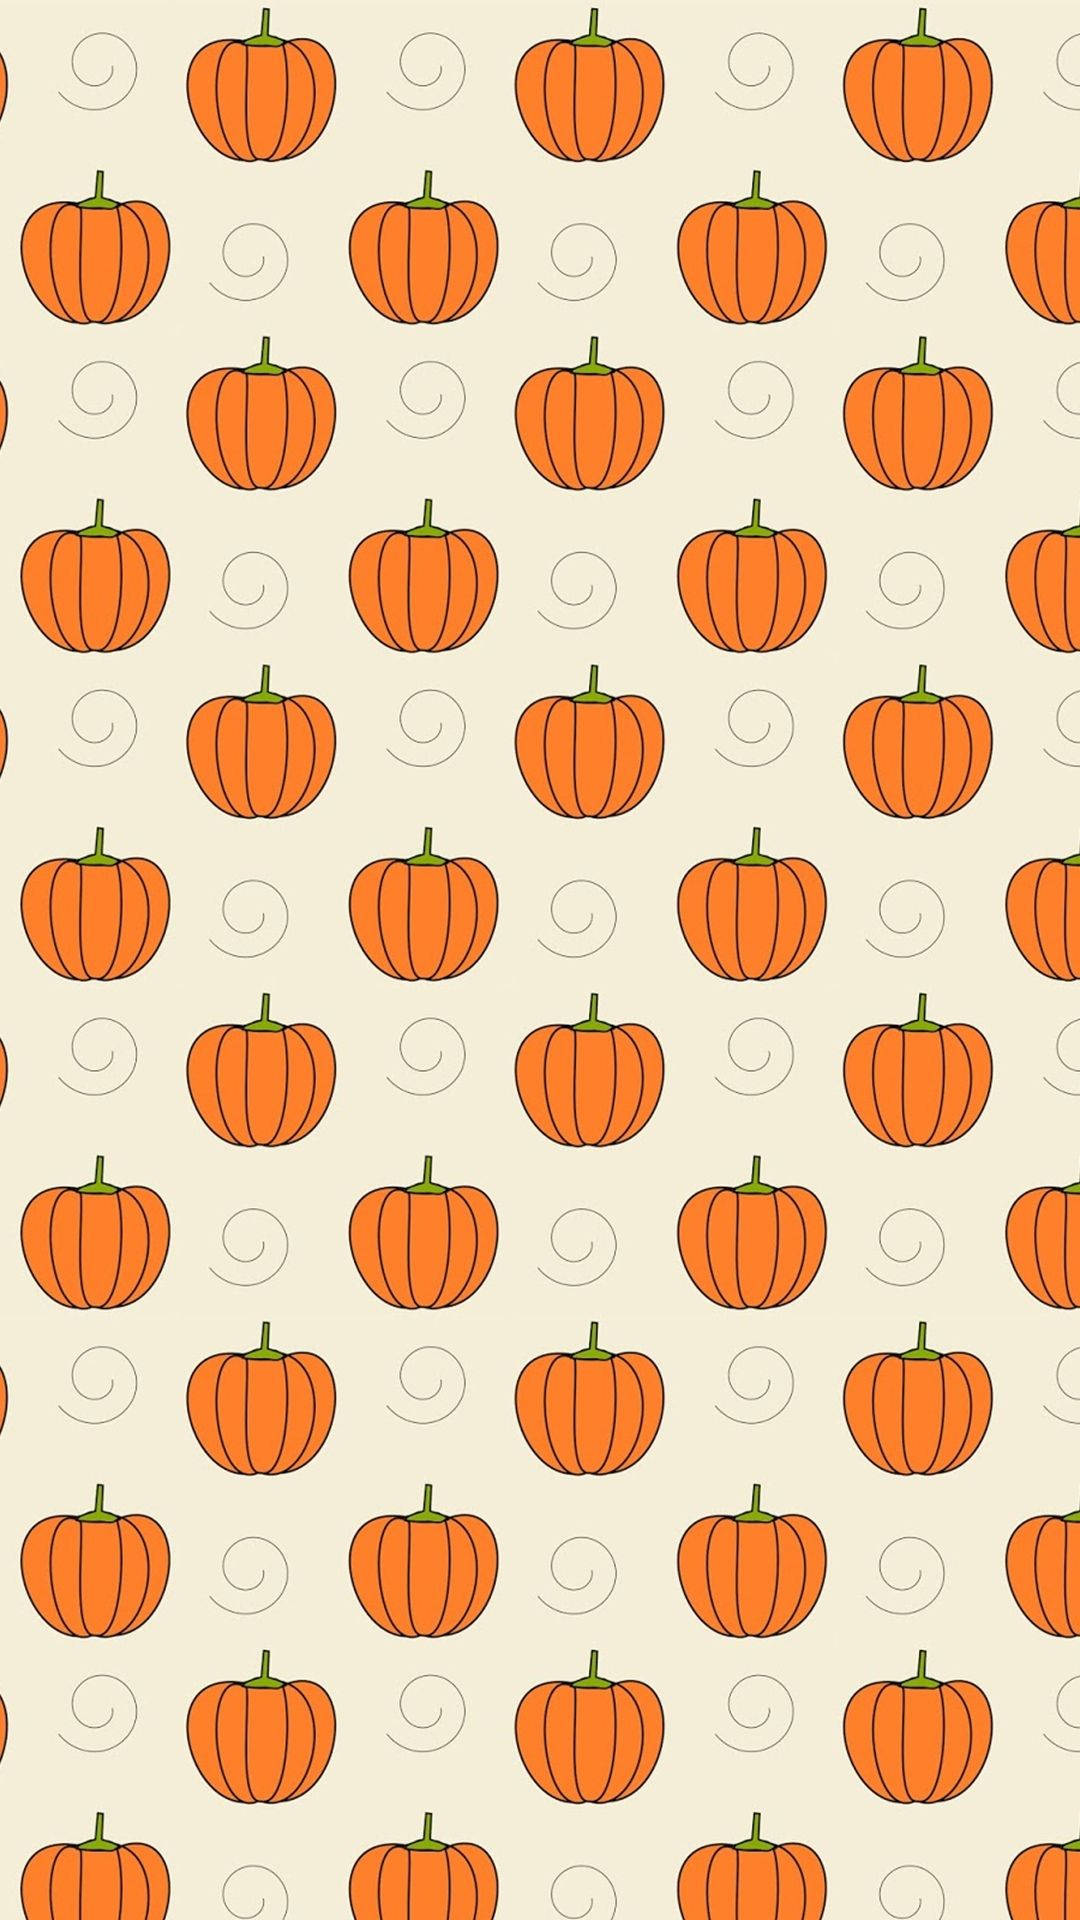 Trick-or-treat iPad pro, the perfect gadget for a spooky Halloween night Wallpaper